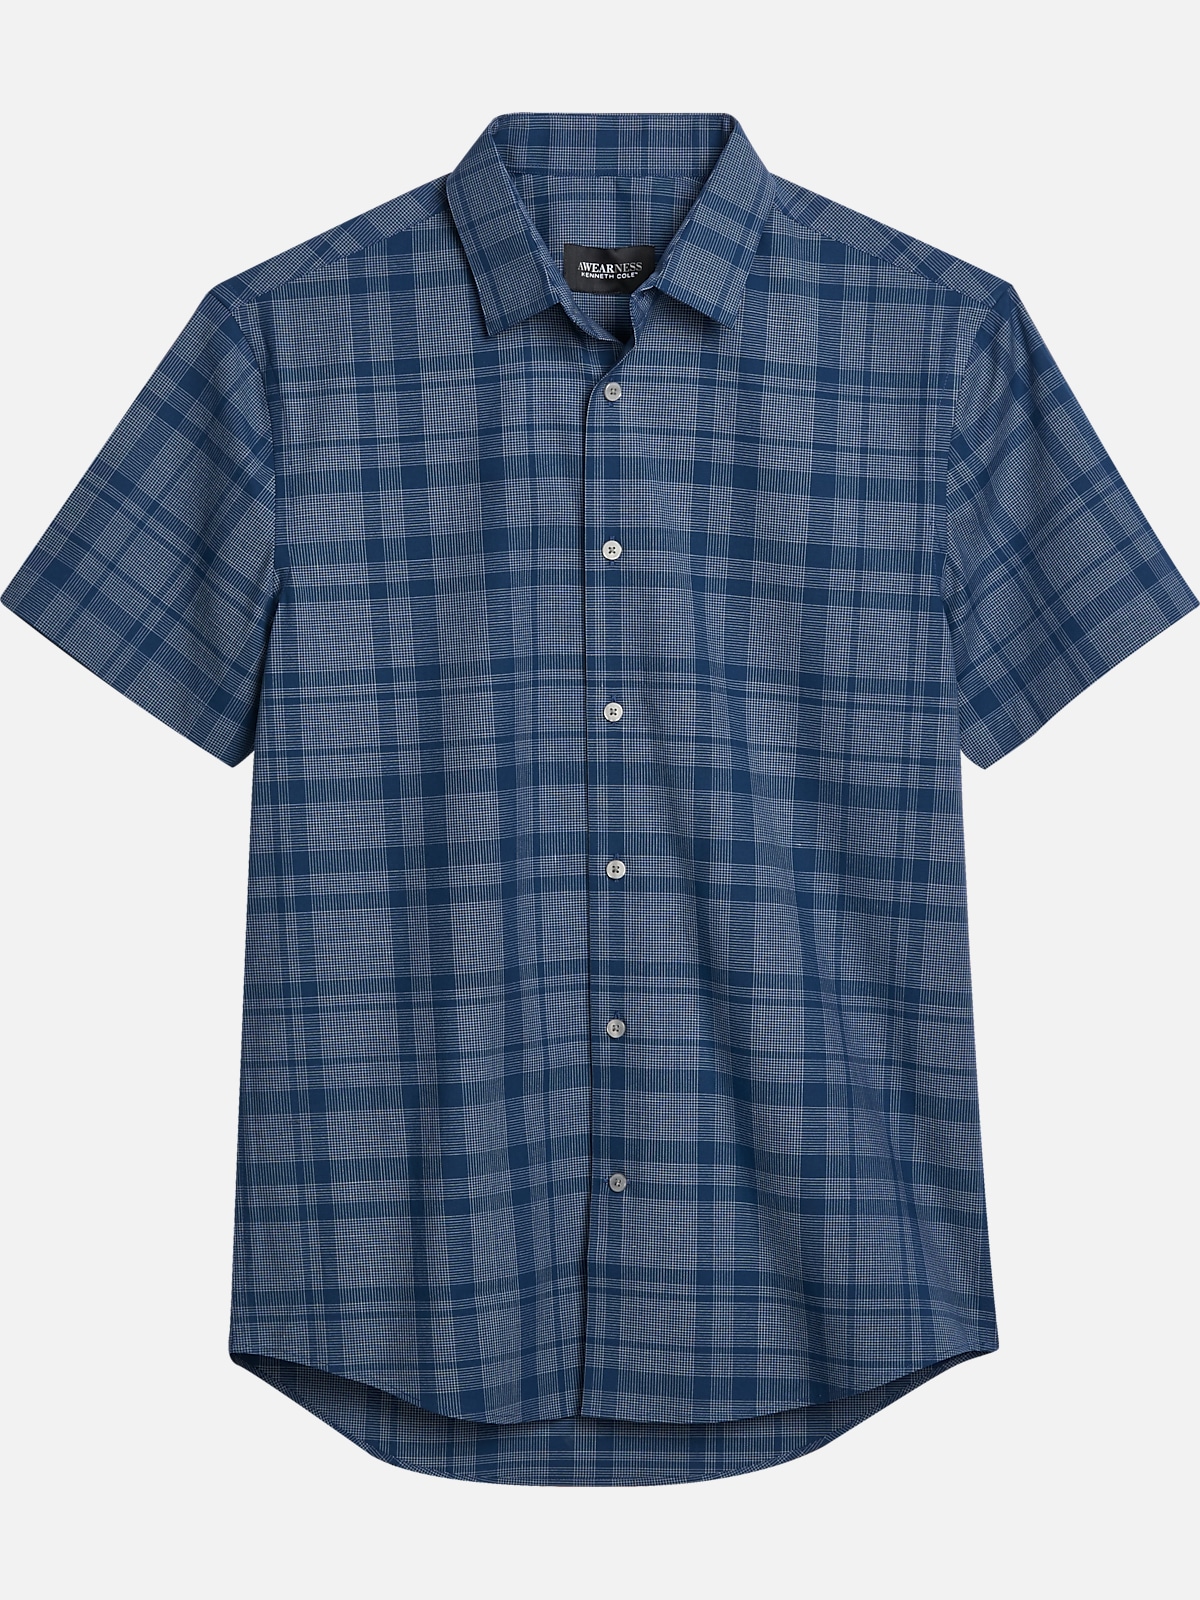 Awearness Kenneth Cole Slim Fit Plaid Short Sleeve Sport Shirt | All ...